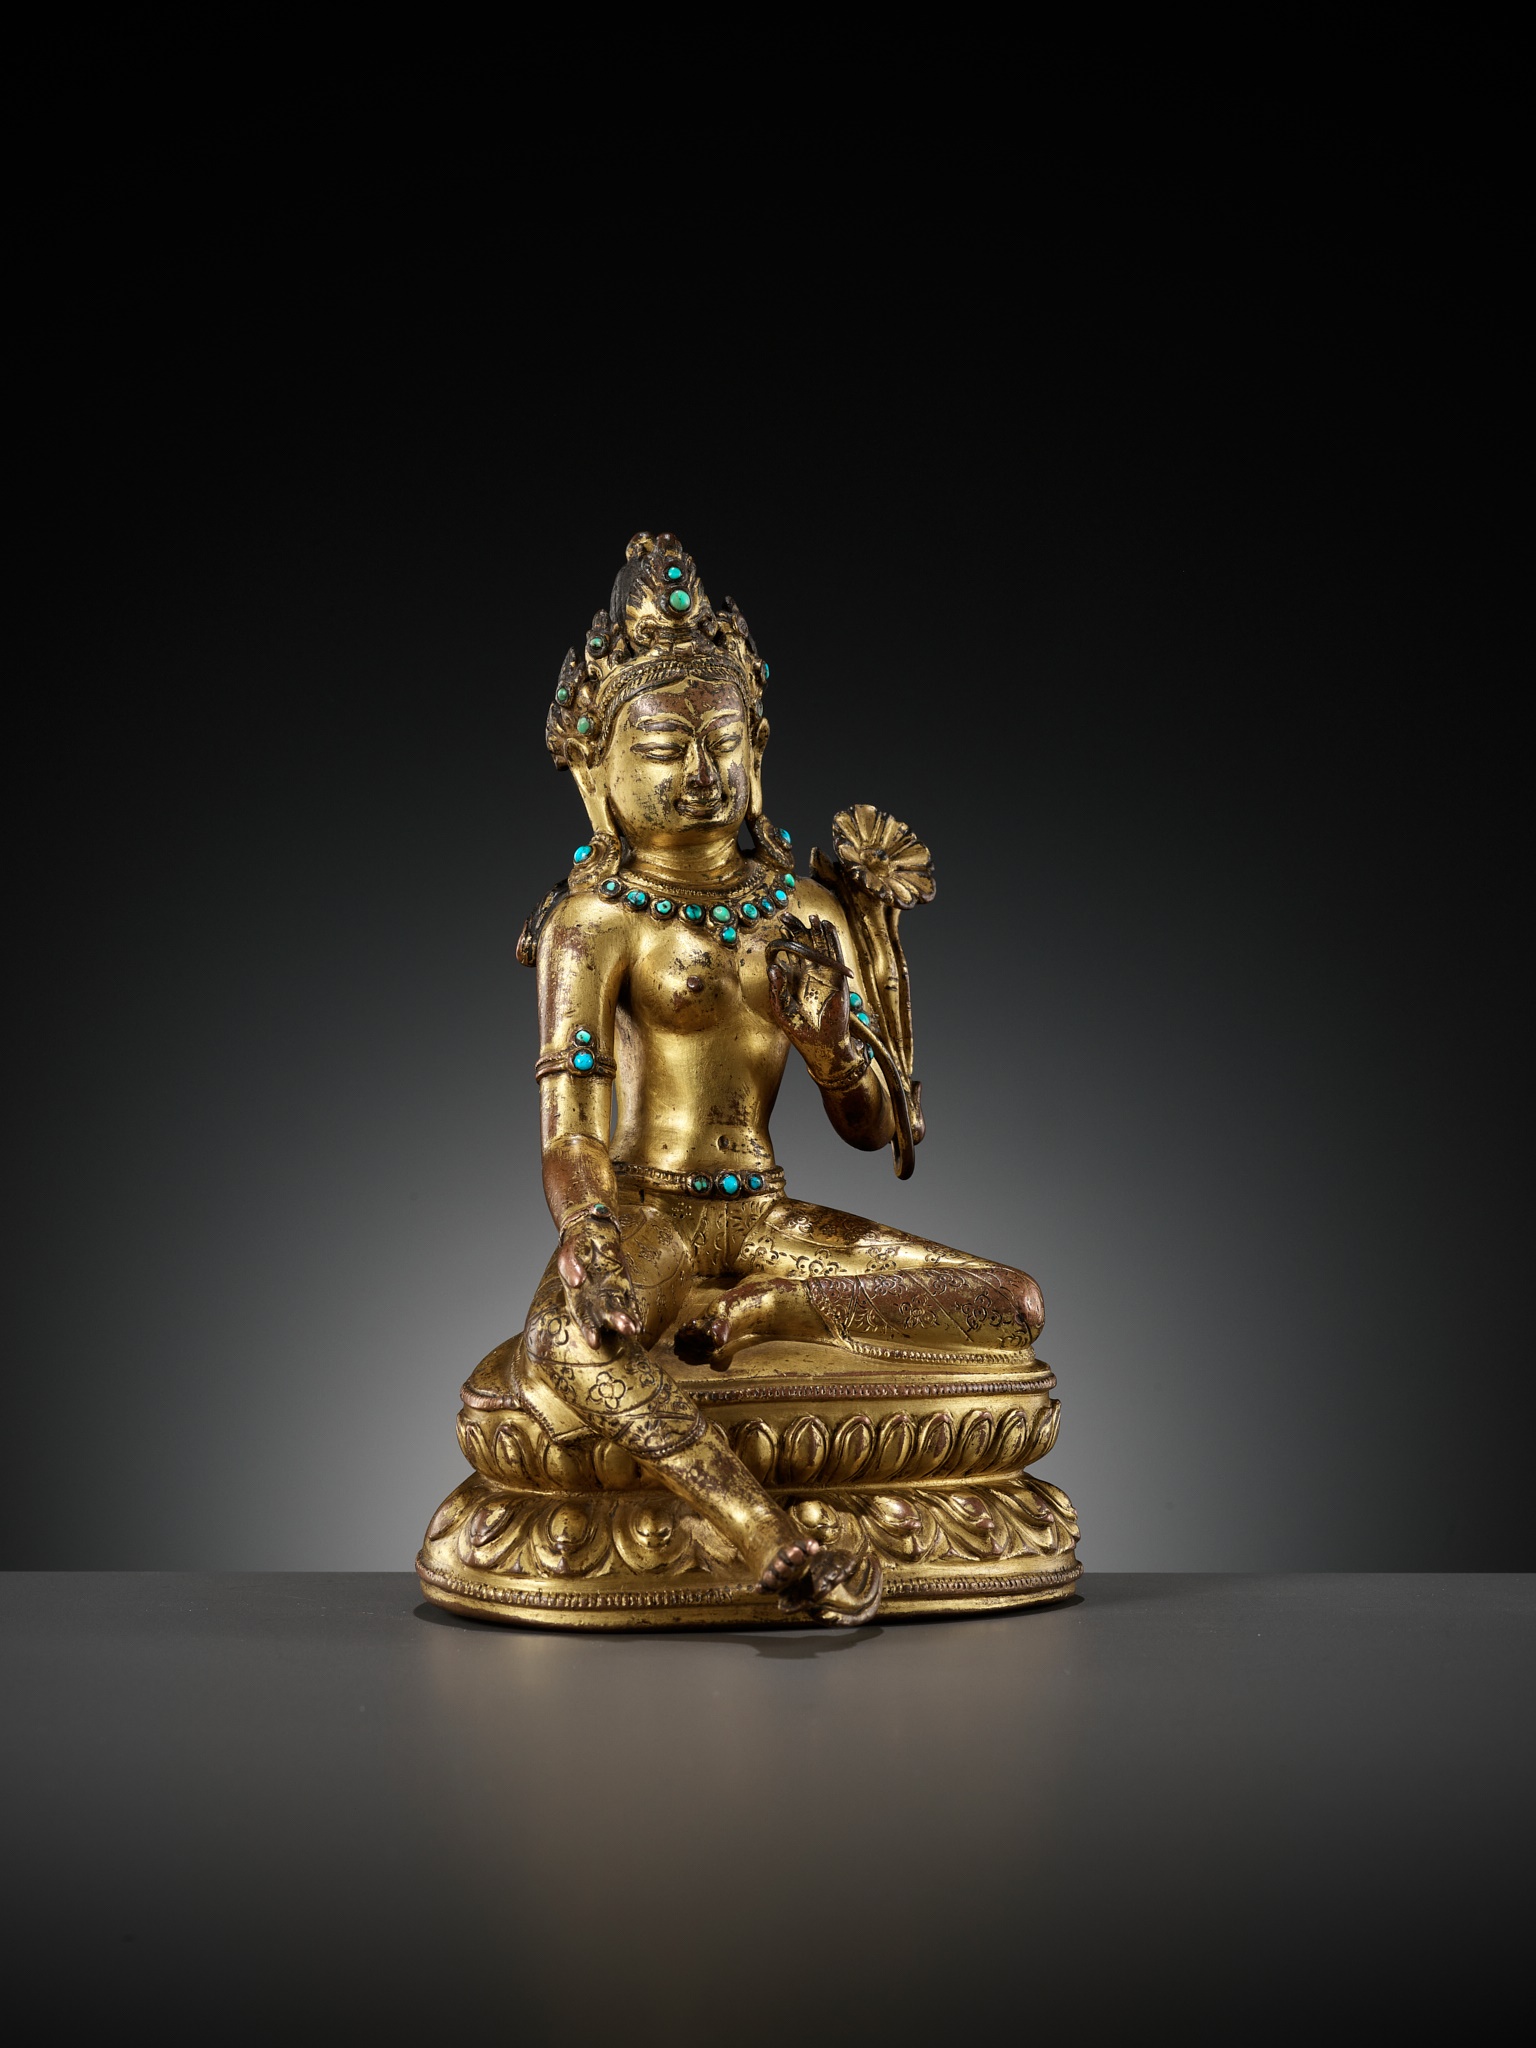 A GILT AND TURQUOISE-INLAID COPPER ALLOY FIGURE OF GREEN TARA, DENSATIL STYLE, TIBET, 14TH CENTURY - Image 13 of 16